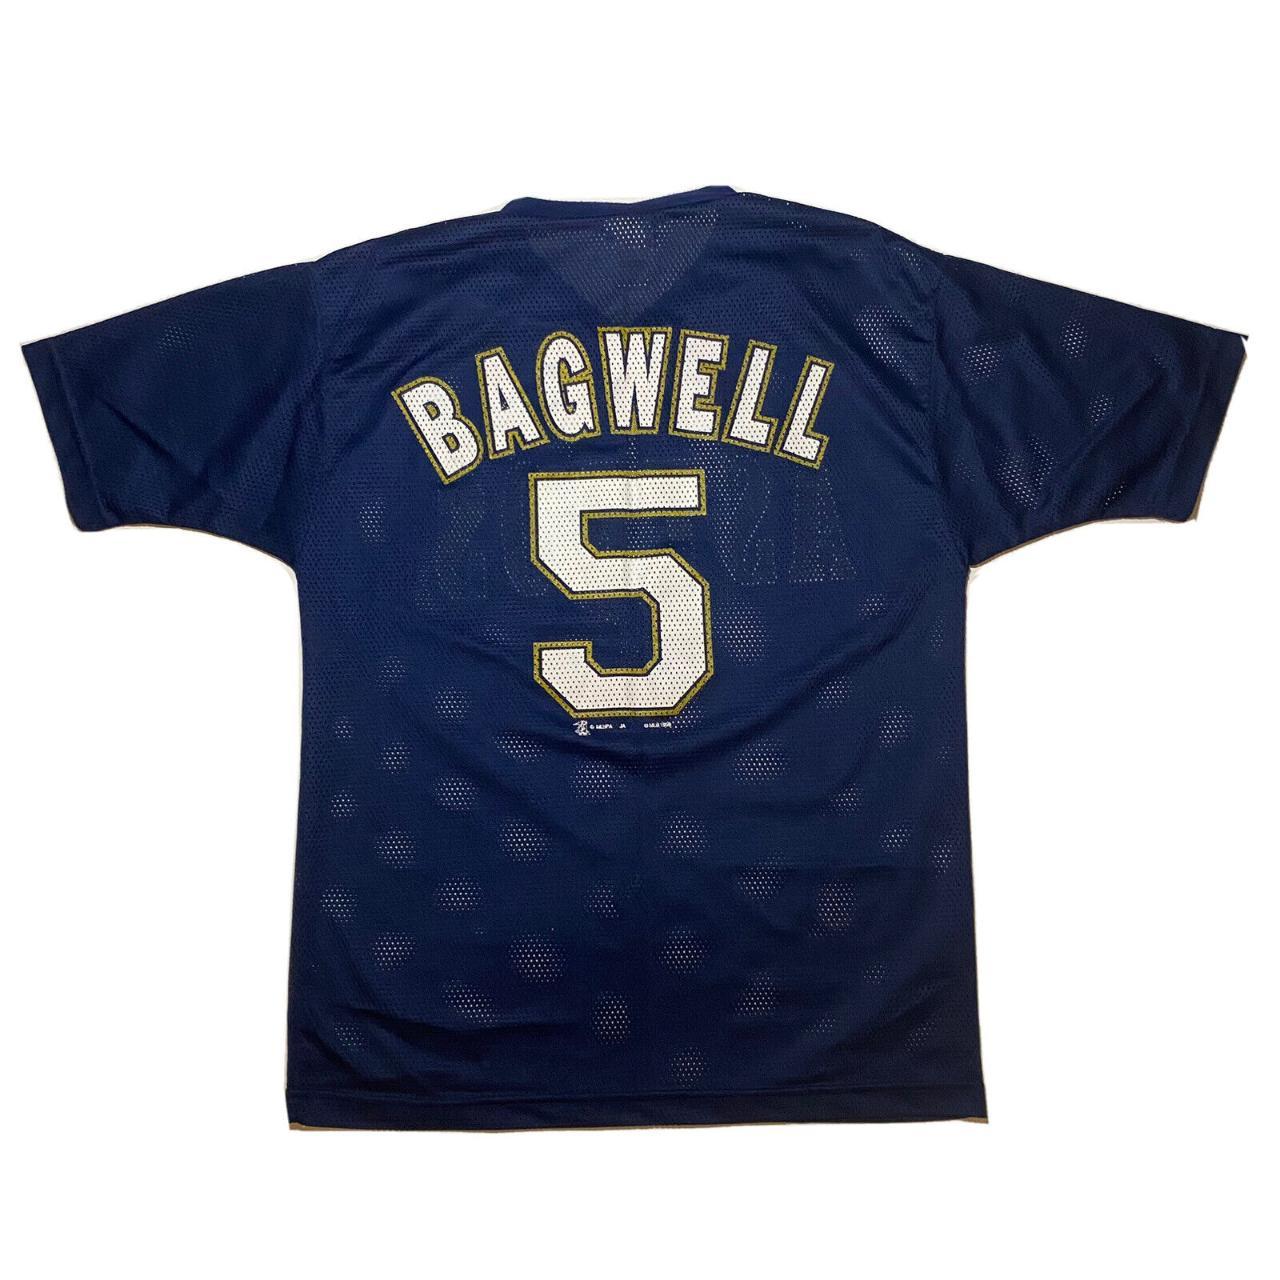 jeff bagwell jersey 90s